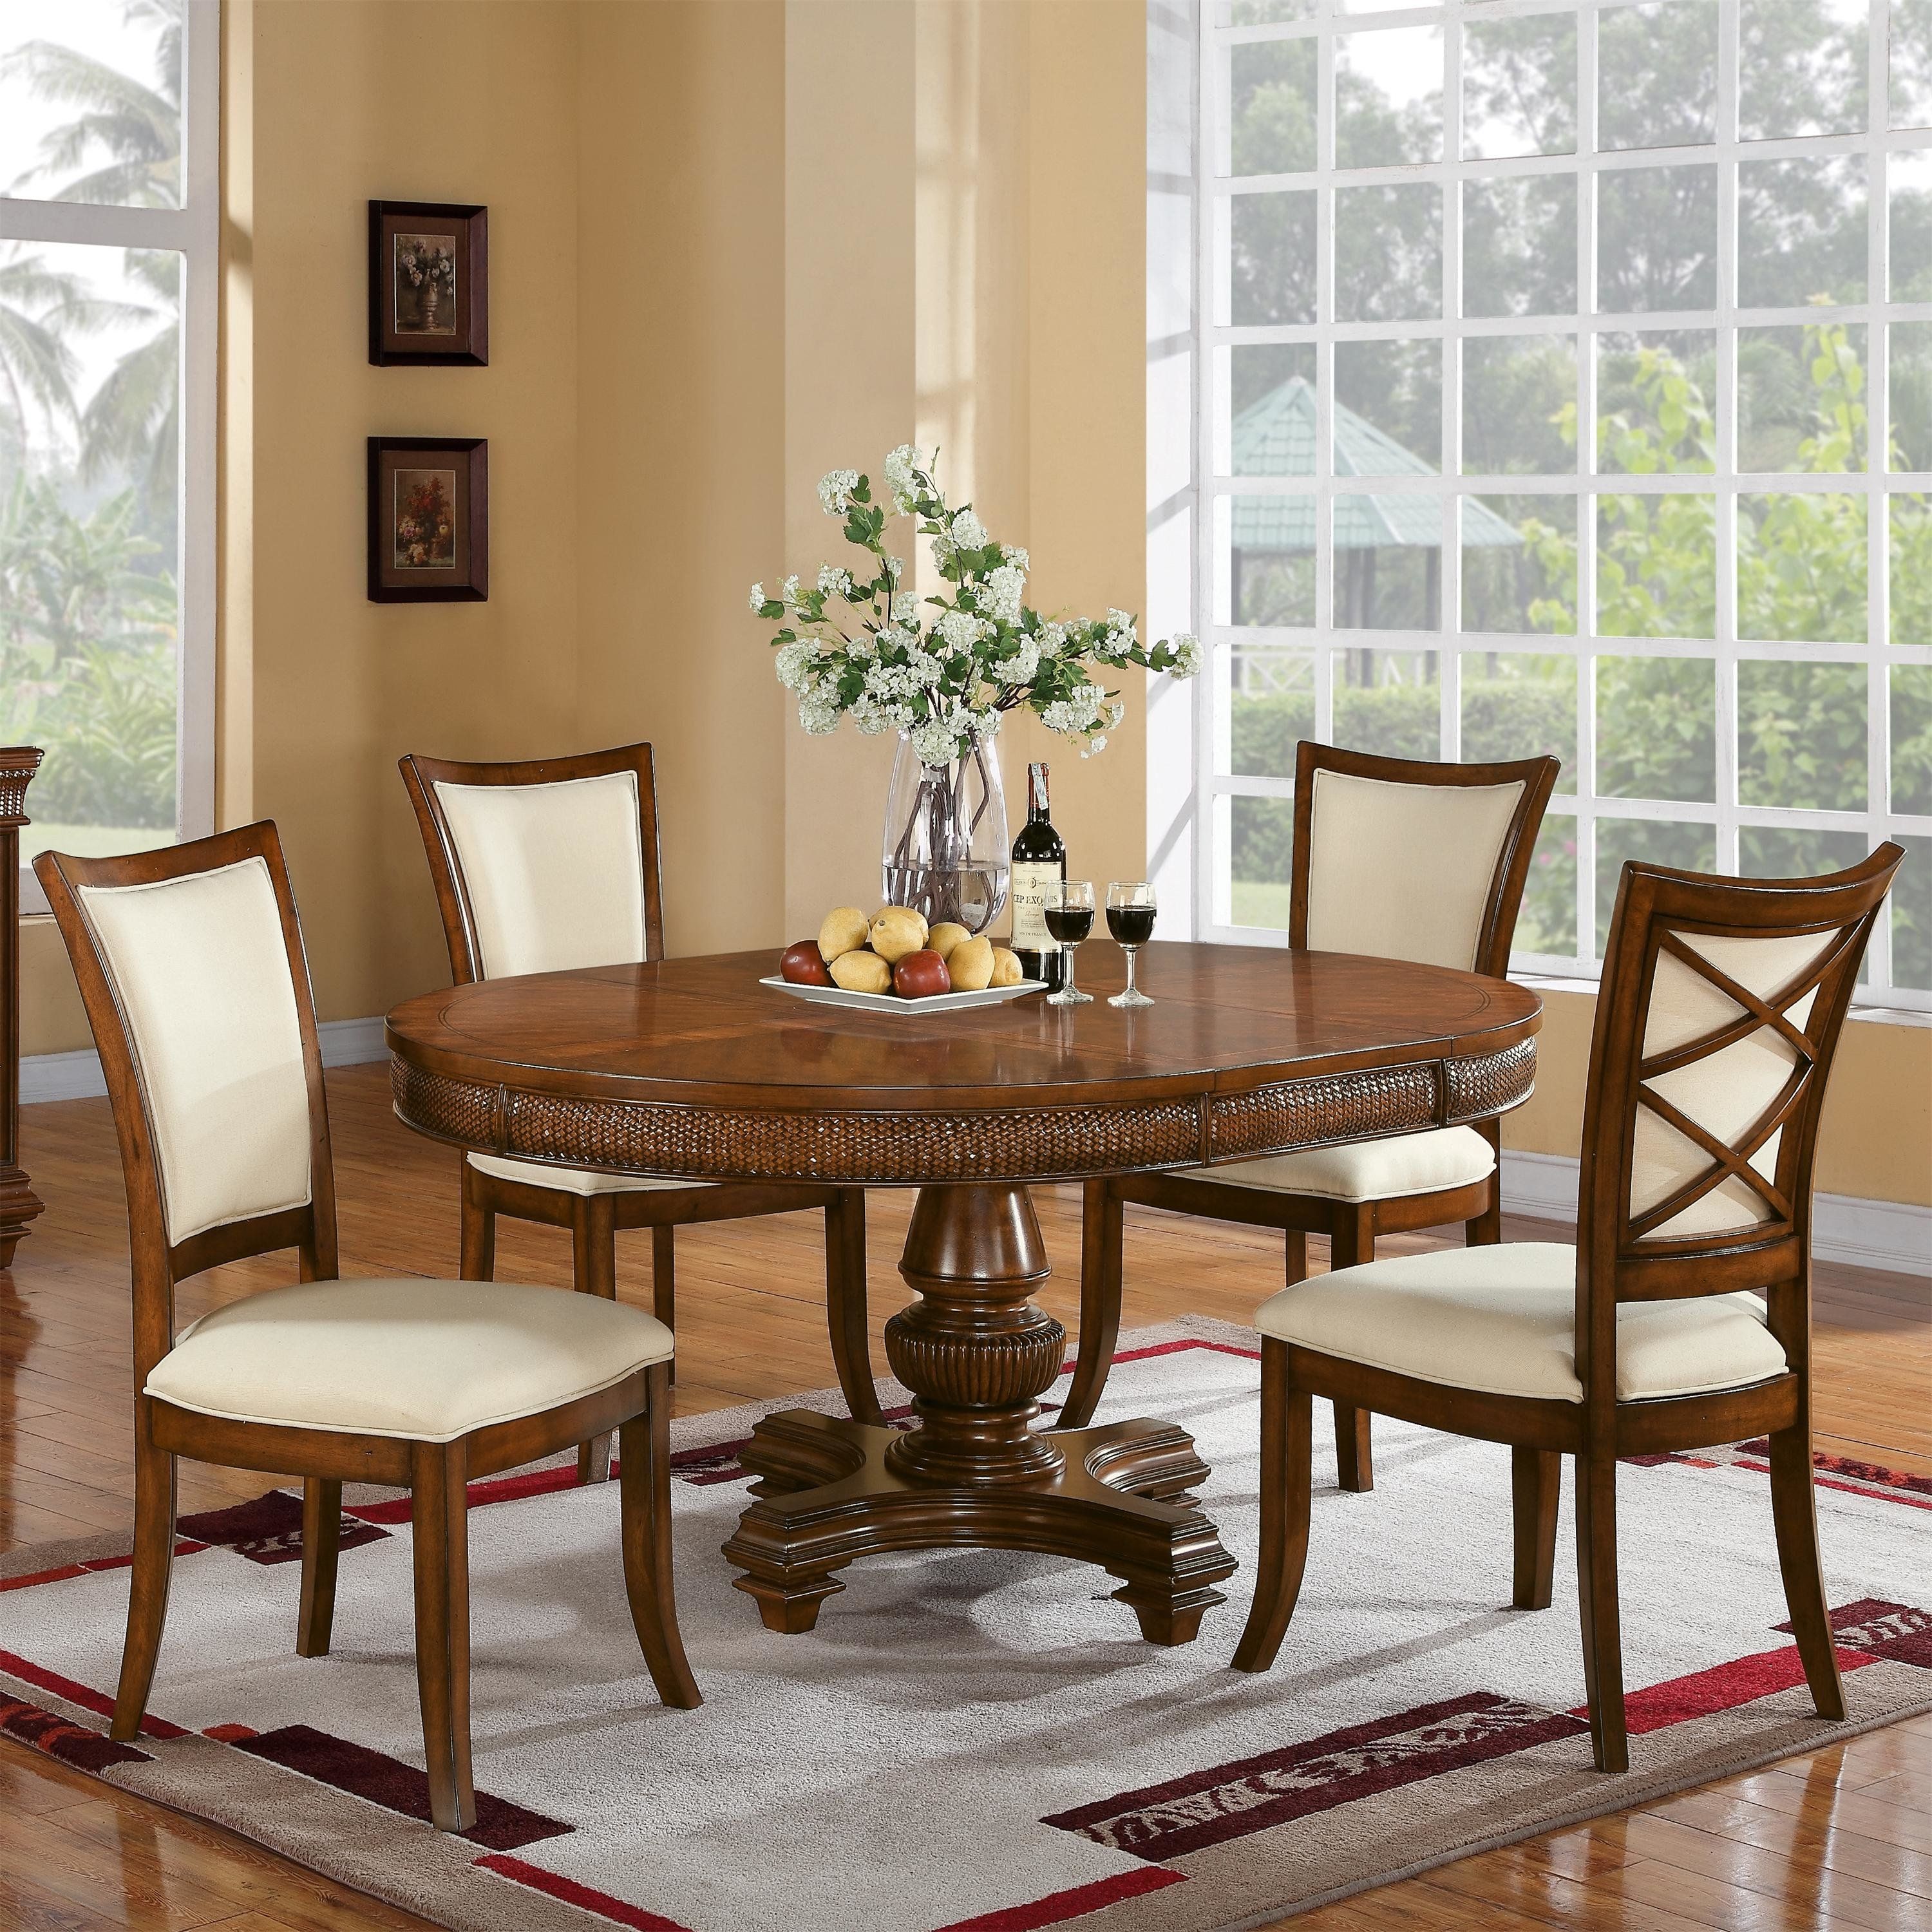 World Menagerie Tameka 5 Piece Dining Set Intended For Most Popular Emmeline 5 Piece Breakfast Nook Dining Sets (View 5 of 20)